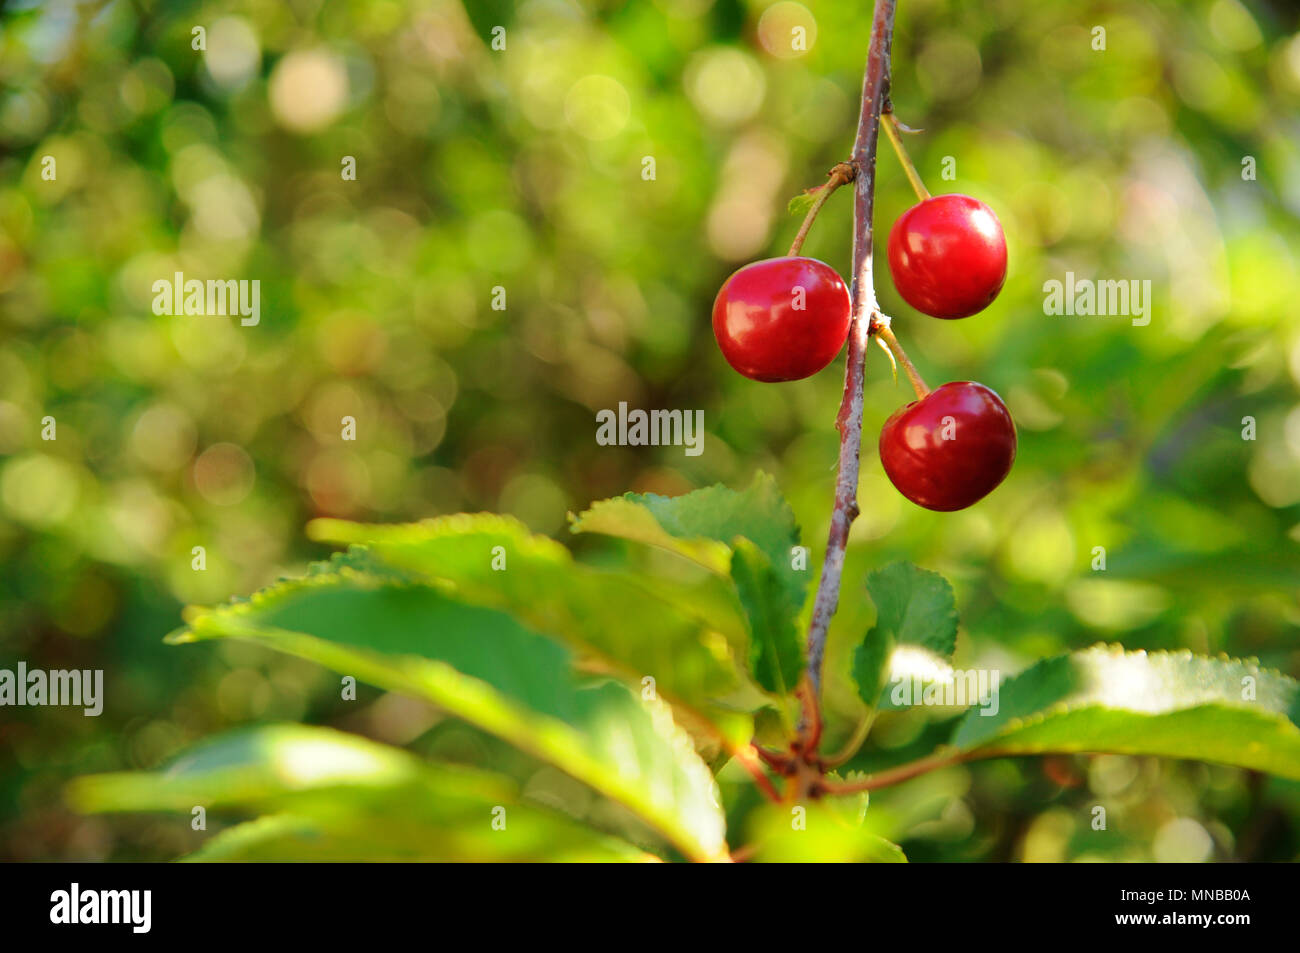 Three red sour cherries on a branch Stock Photo